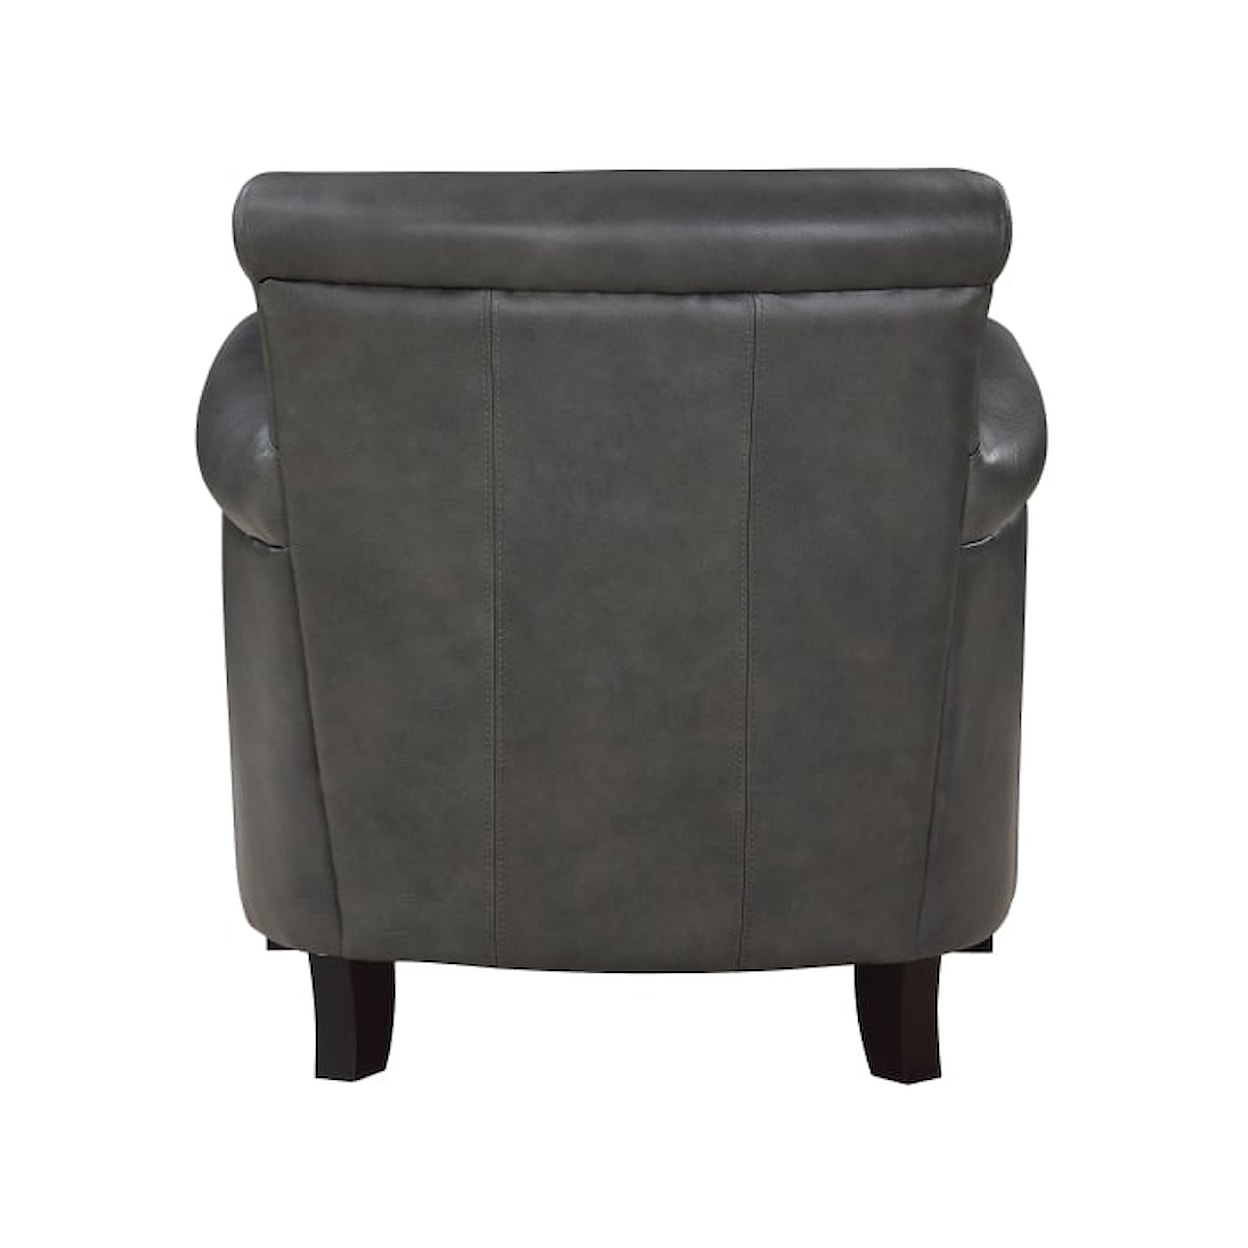 Homelegance Furniture Braintree Accent Chair